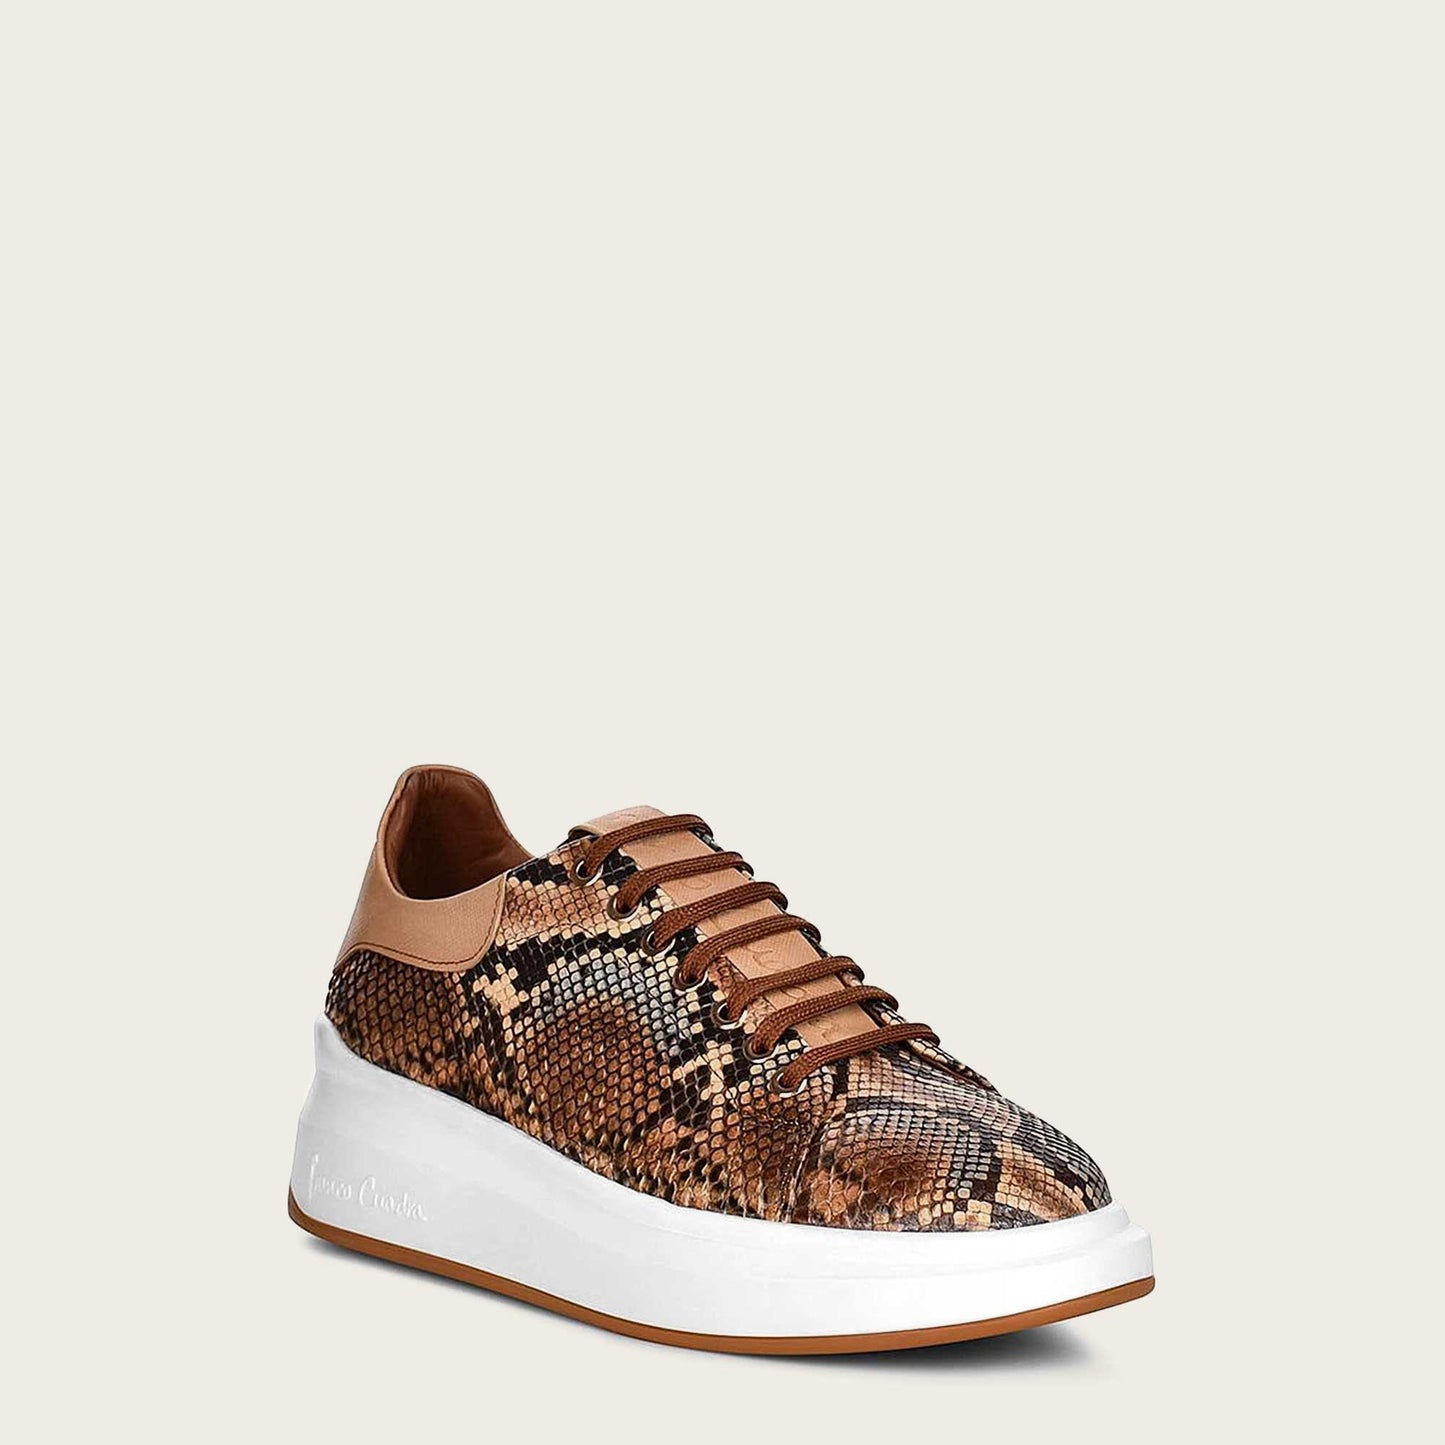 Python brown leather sneakers, python brown leather. The intricate applications in bovine leather add a touch of uniqueness to their design